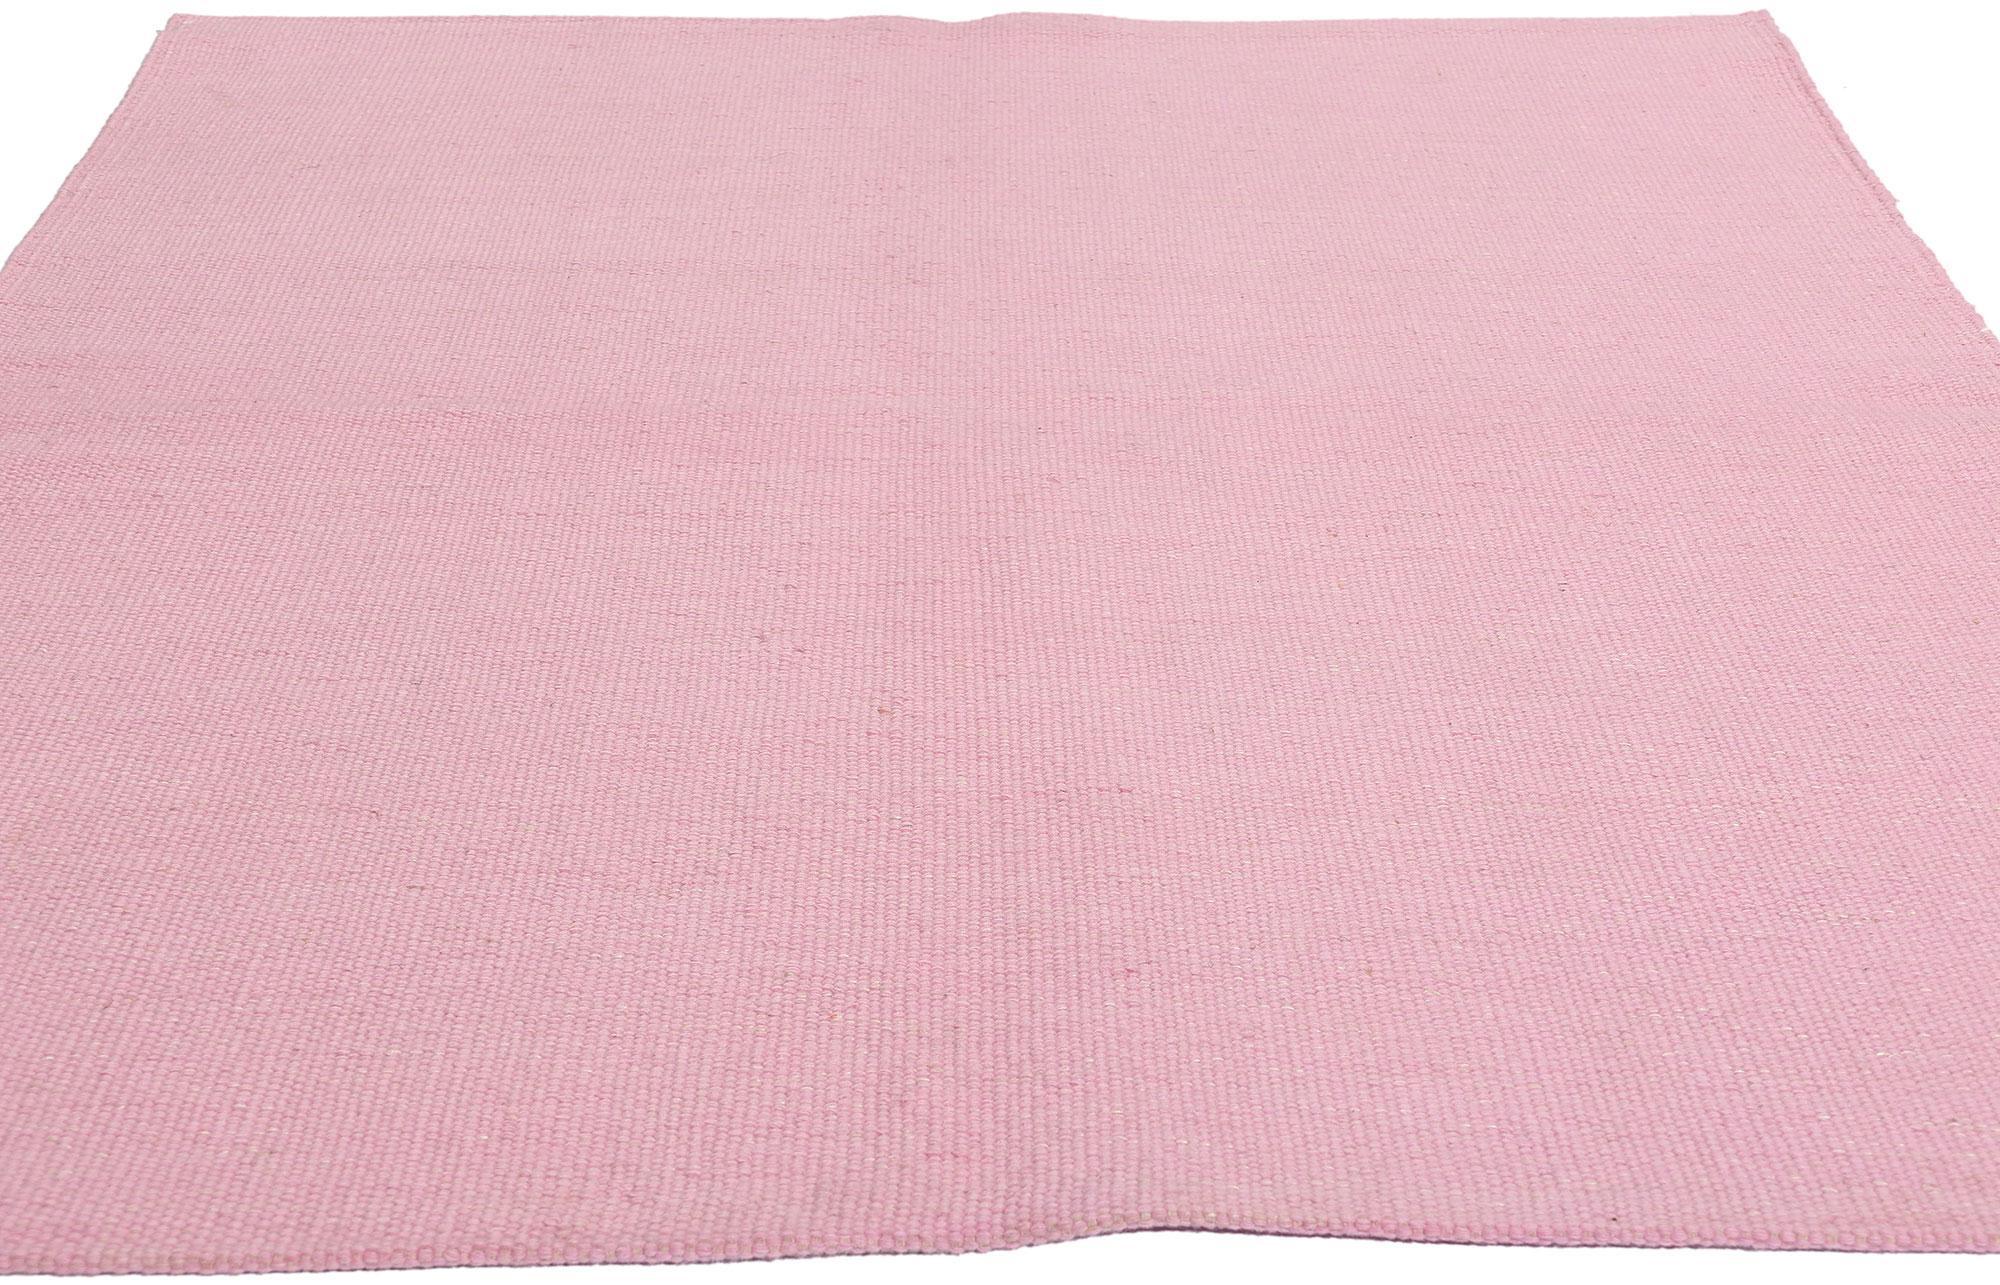 Hand-Woven New Swedish Inspired Pink Kilim Rug with Scandinavian Modern Style For Sale